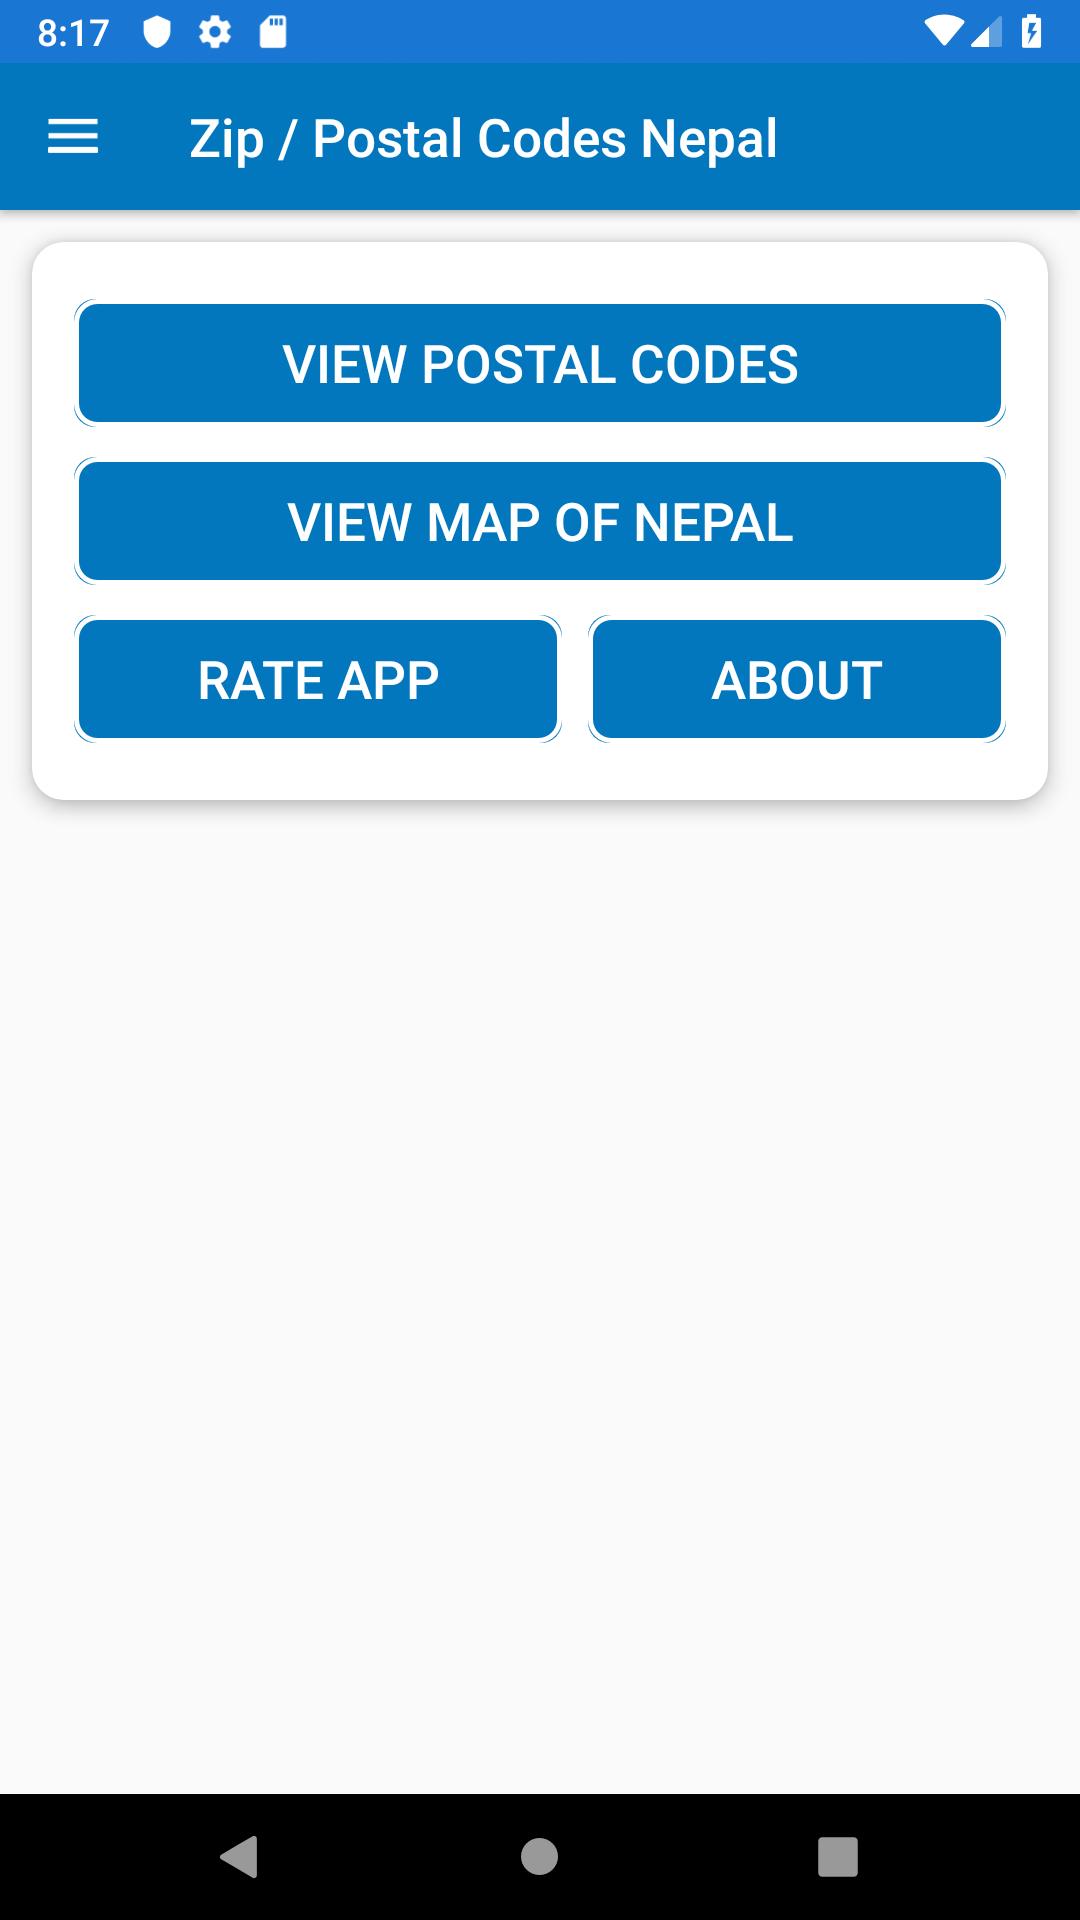 Zip / Postal Codes Nepal for Android - APK Download